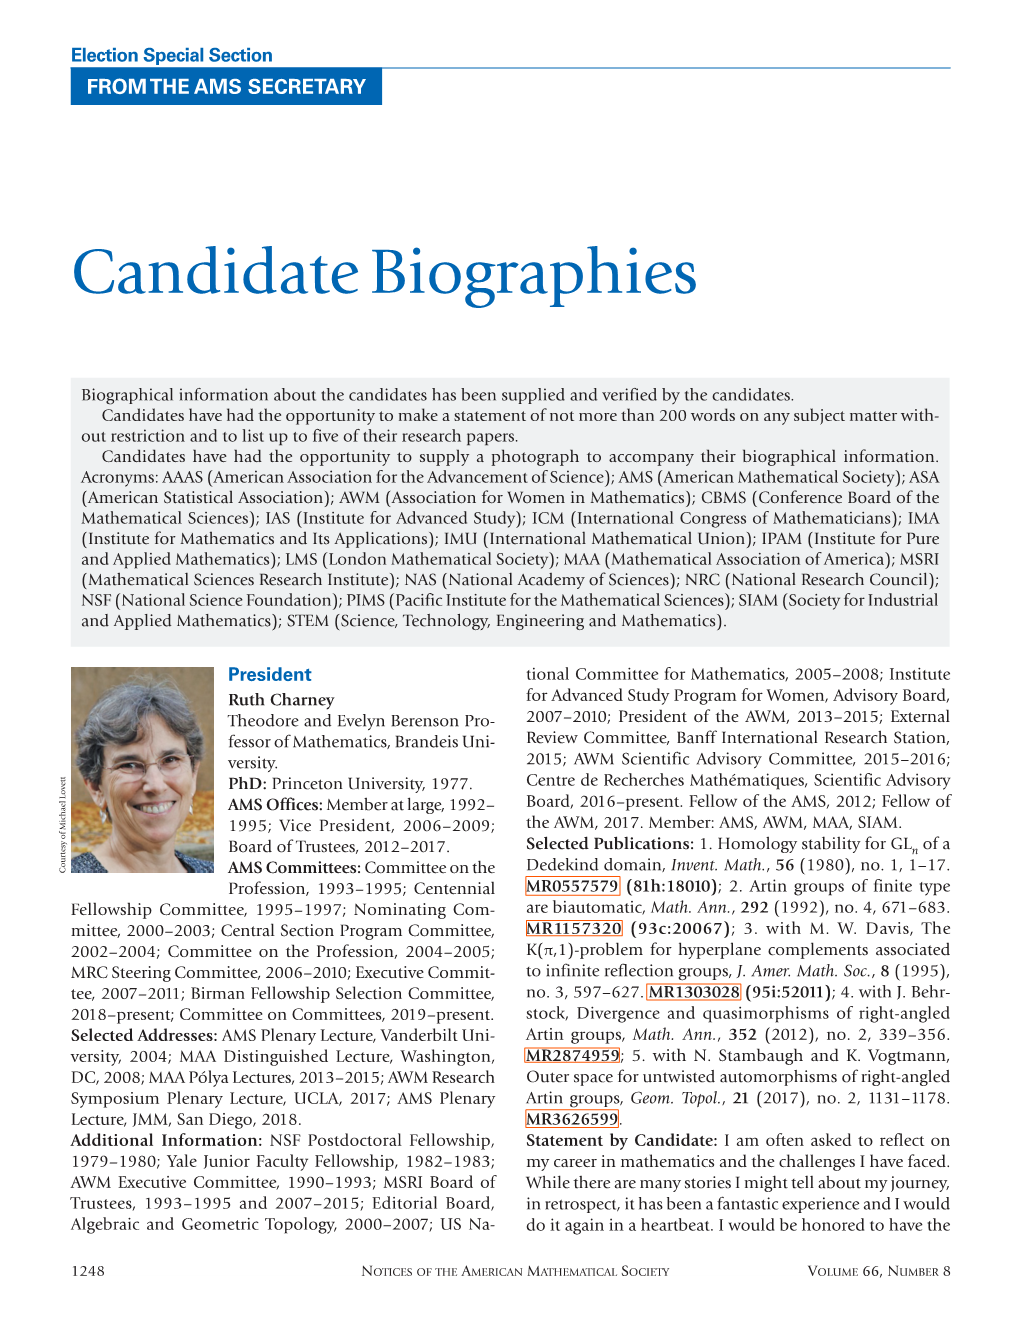 Candidate Biographies